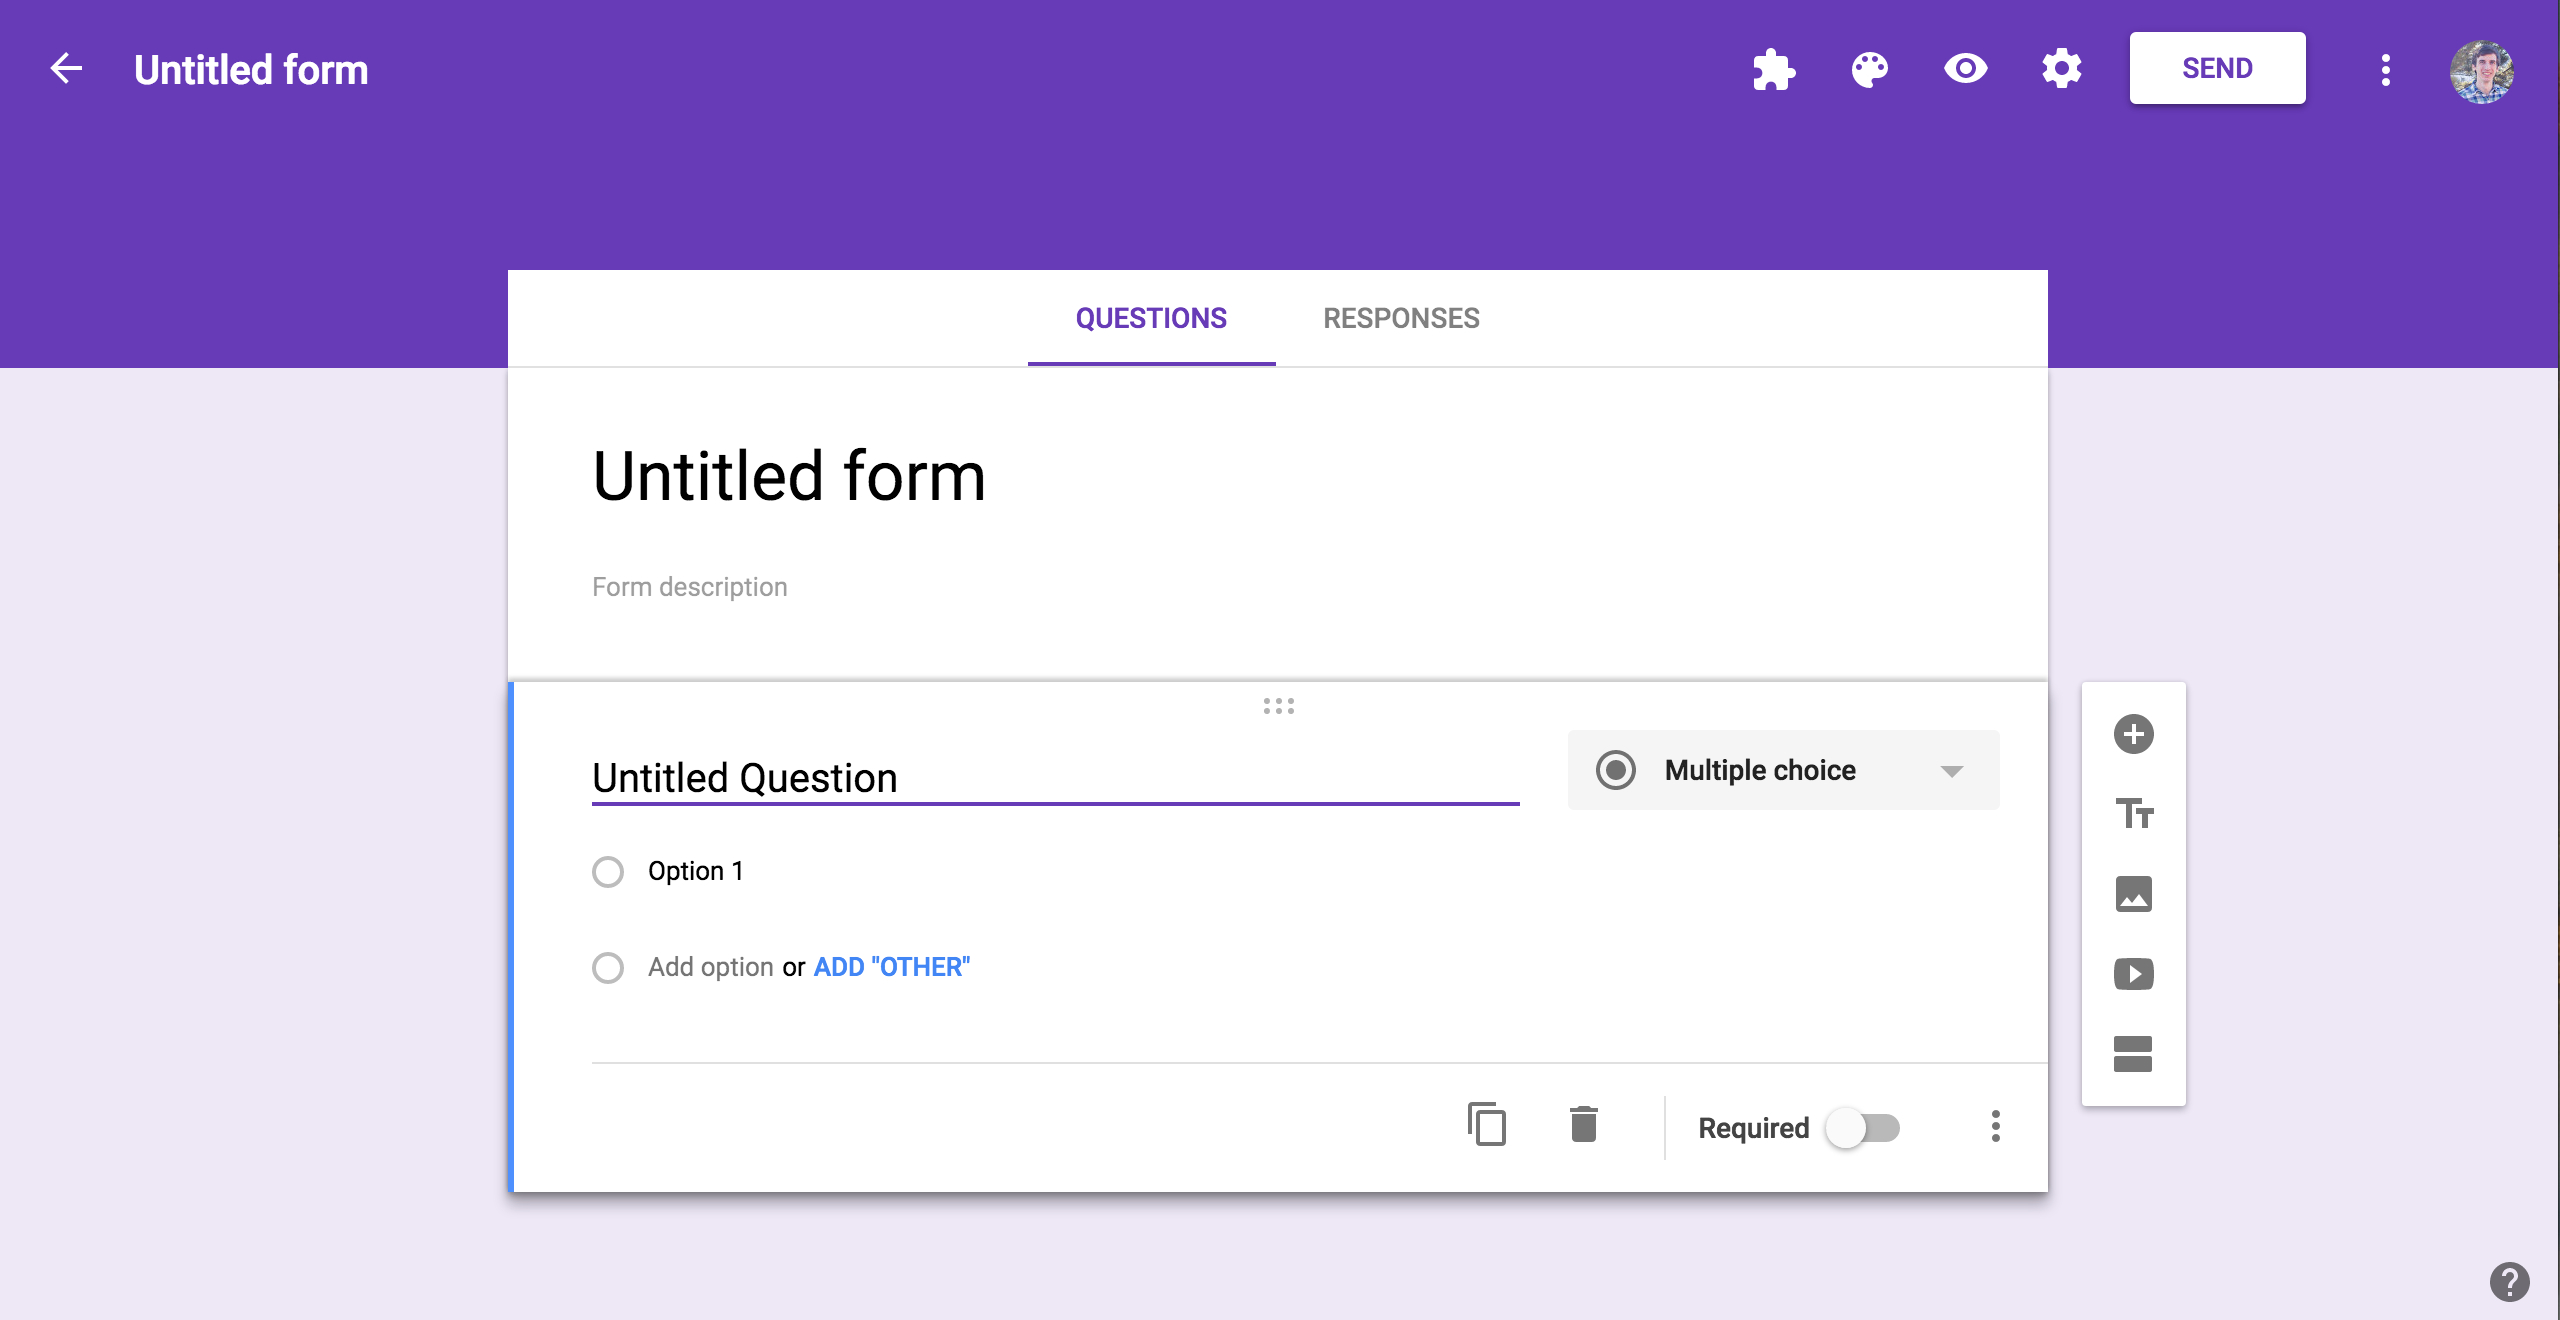 Forms Google Com Spreadsheet In Google Forms Guide: Everything You Need To Make Great Forms For Free